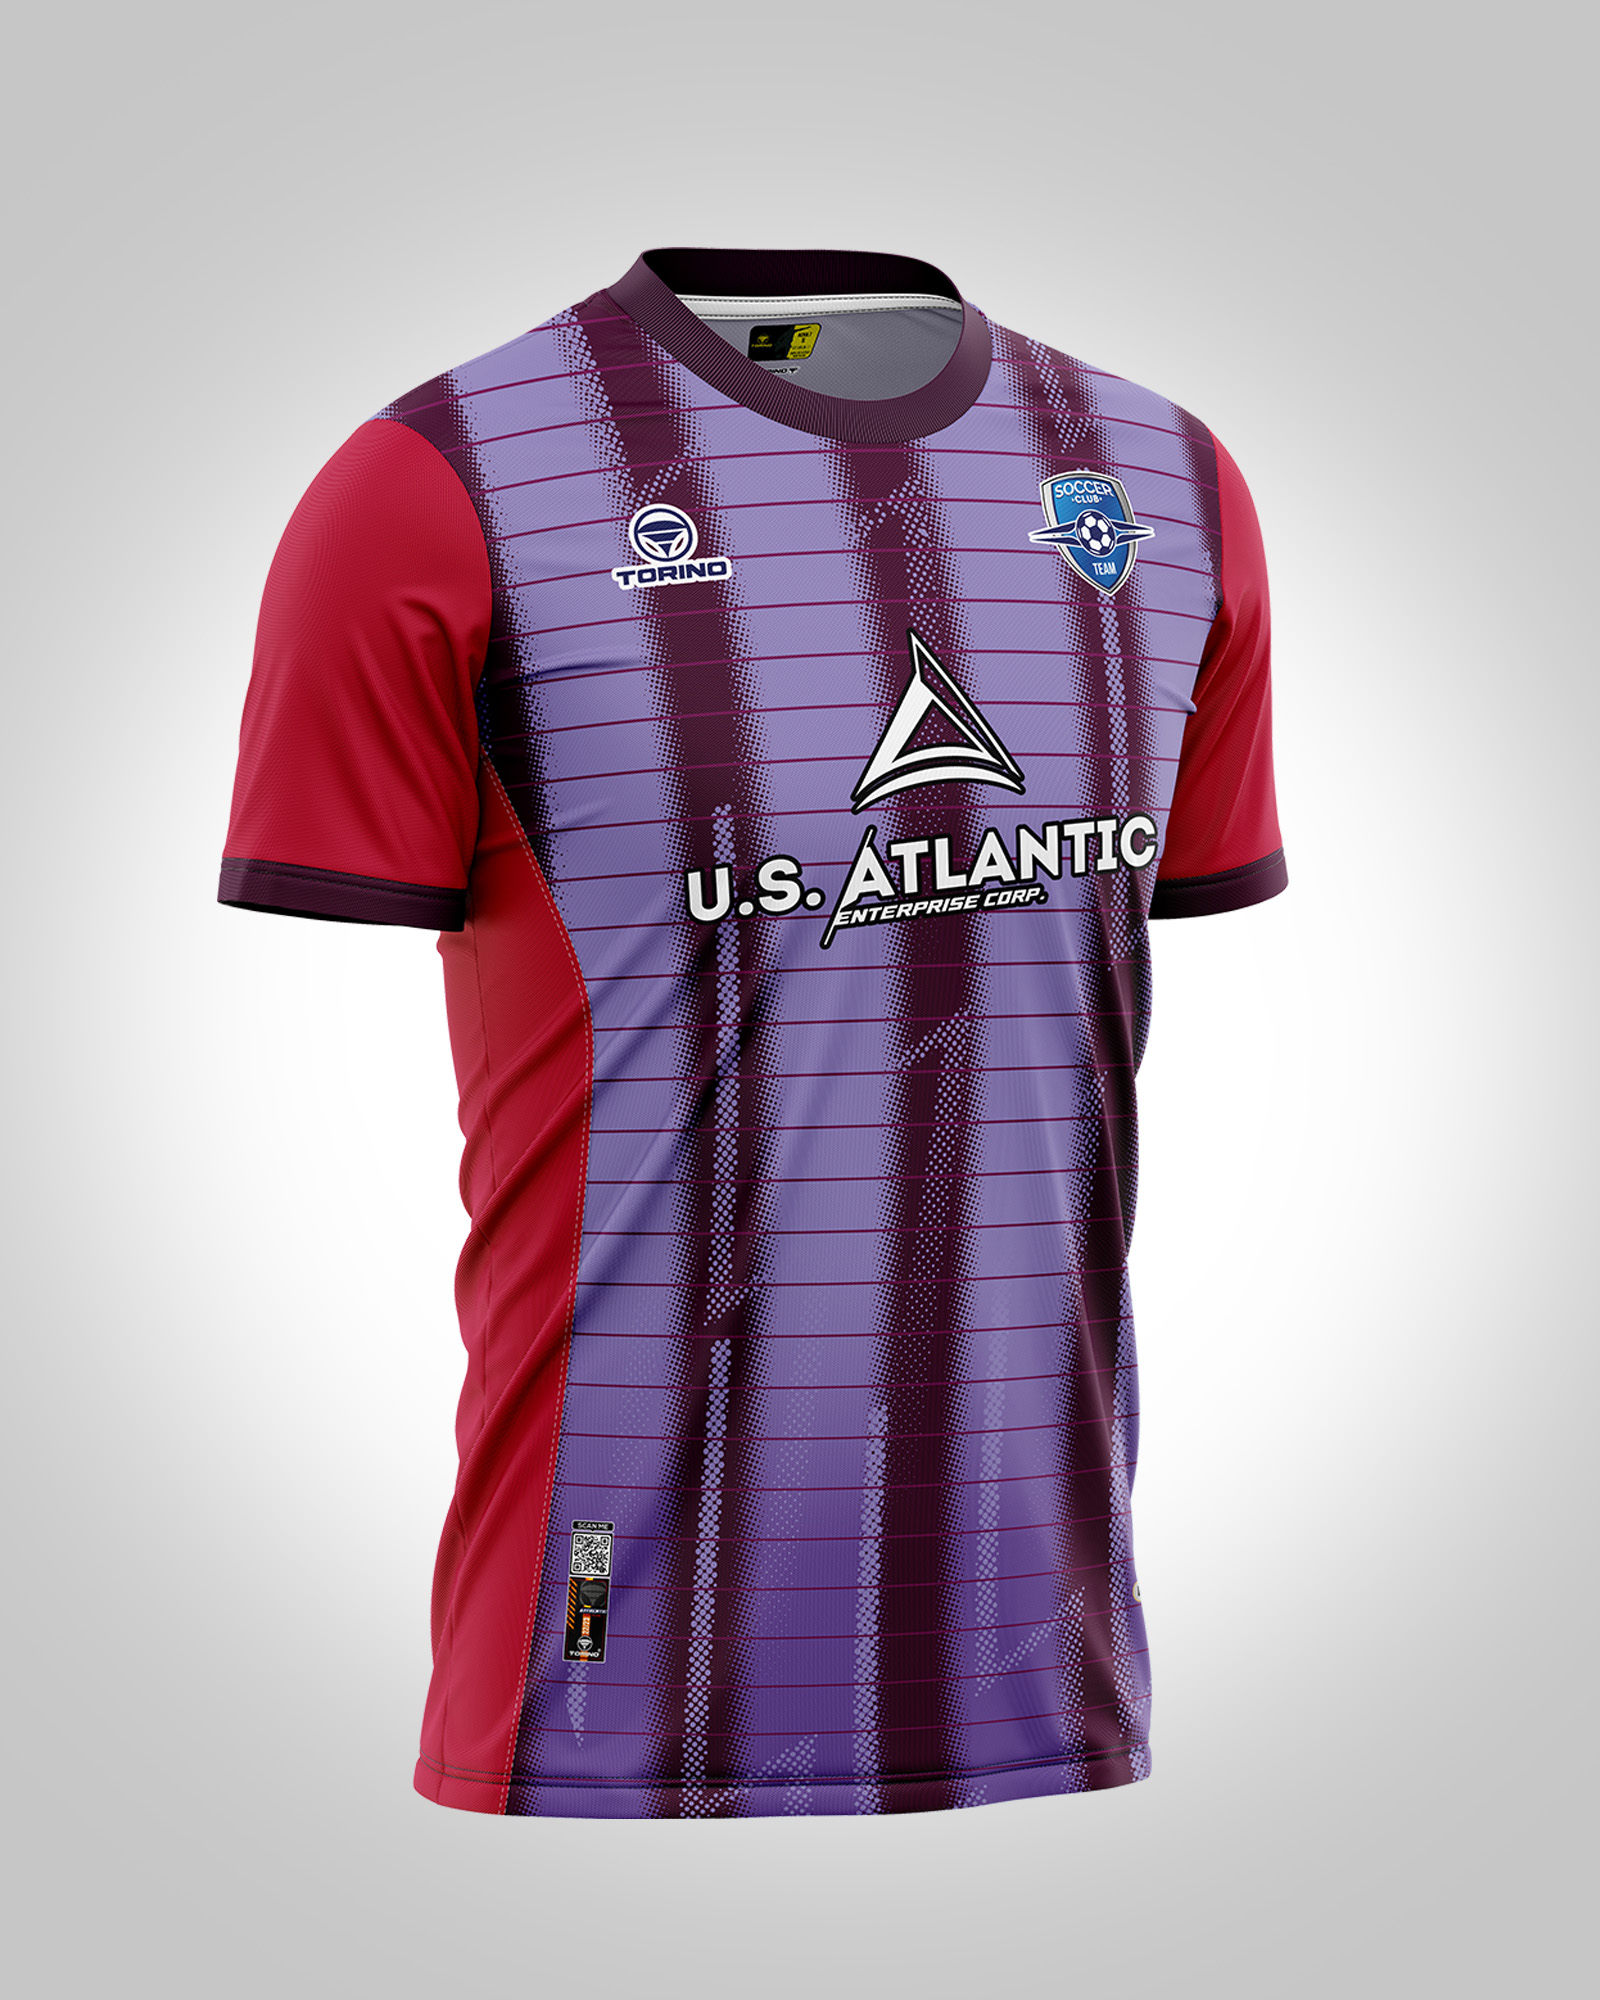 jersey_competition12a